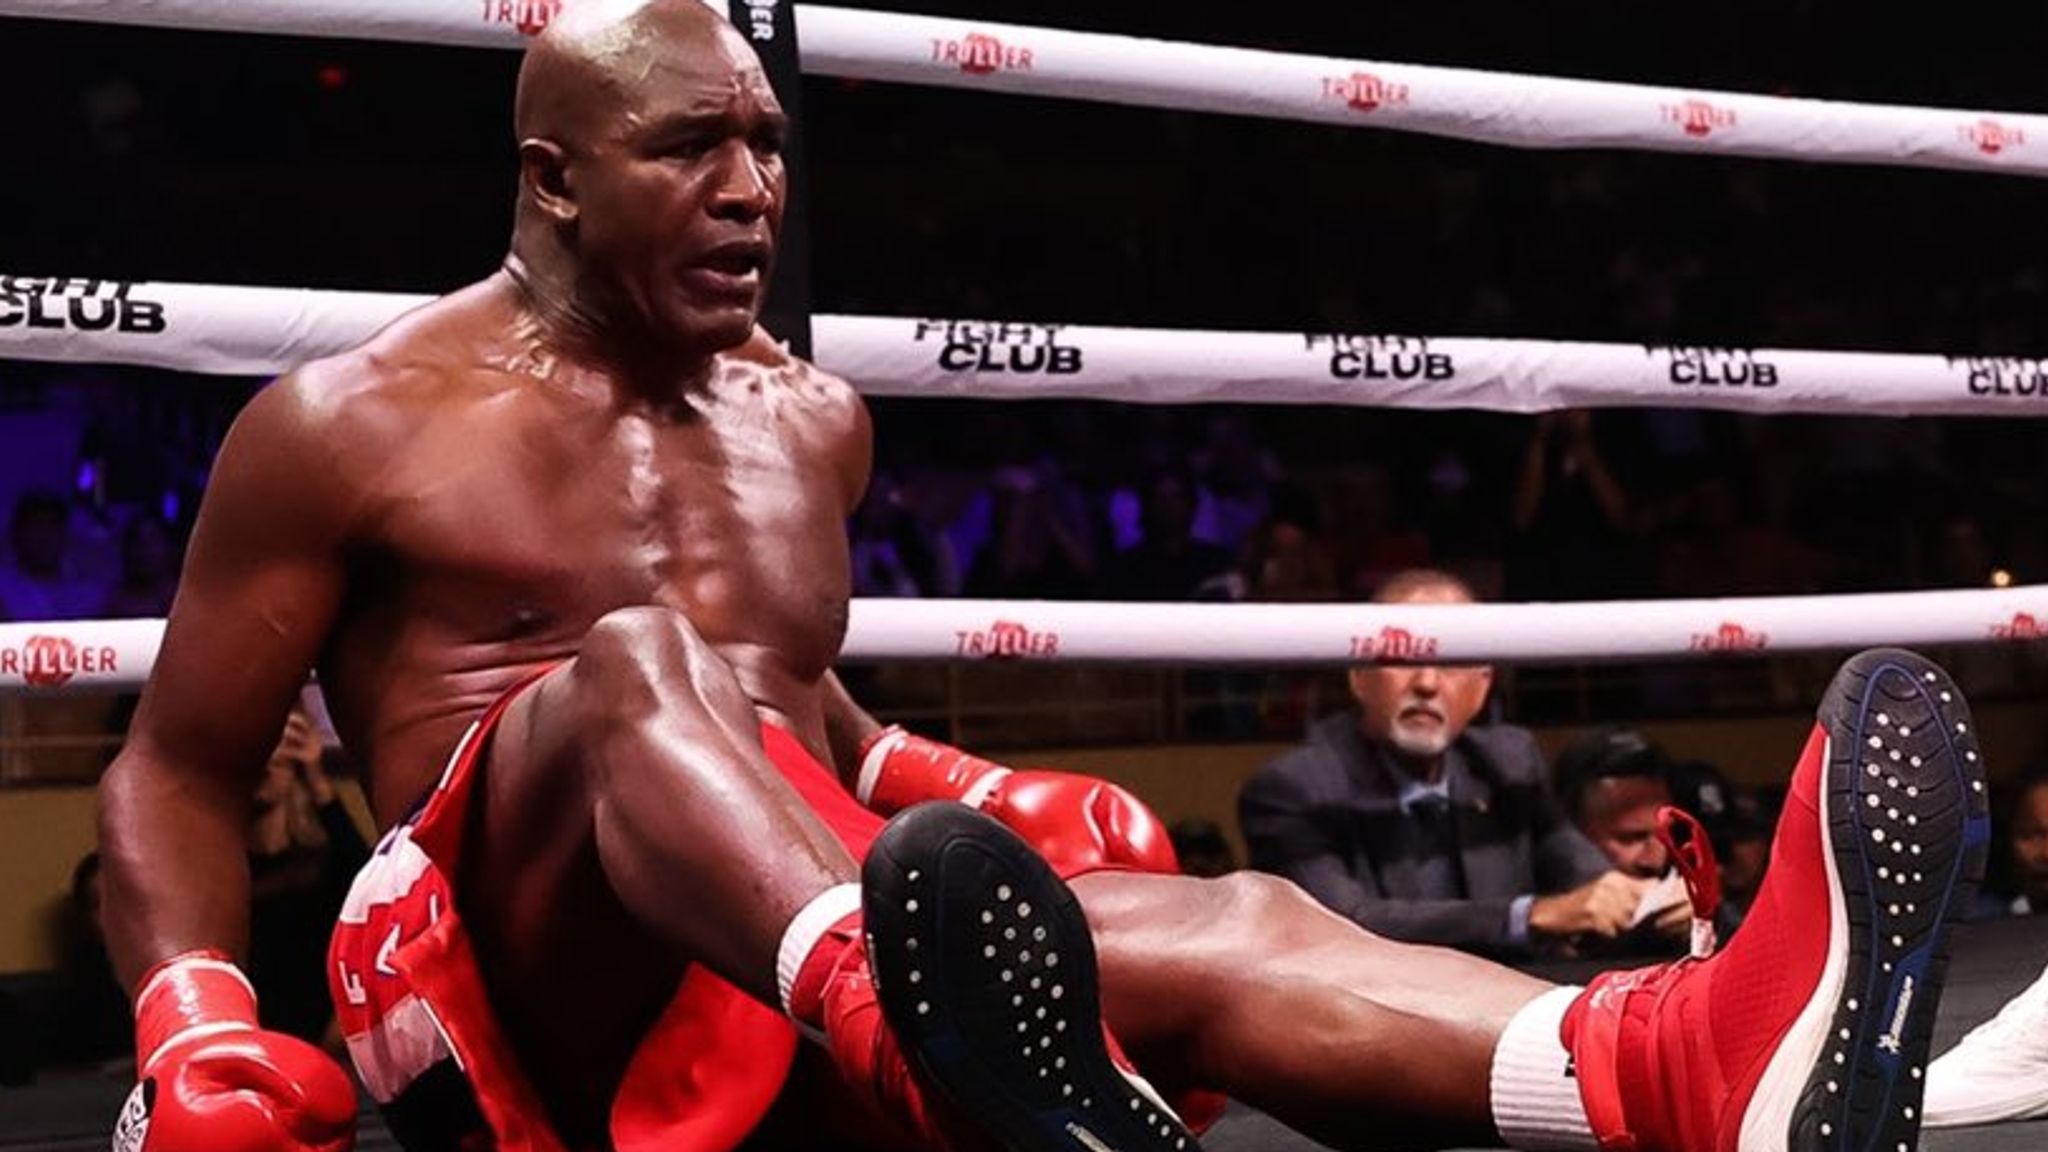 Evander Holyfield, aged 58, beaten by Vitor Belfort via first-round TKO | Boxing News | Sky Sports